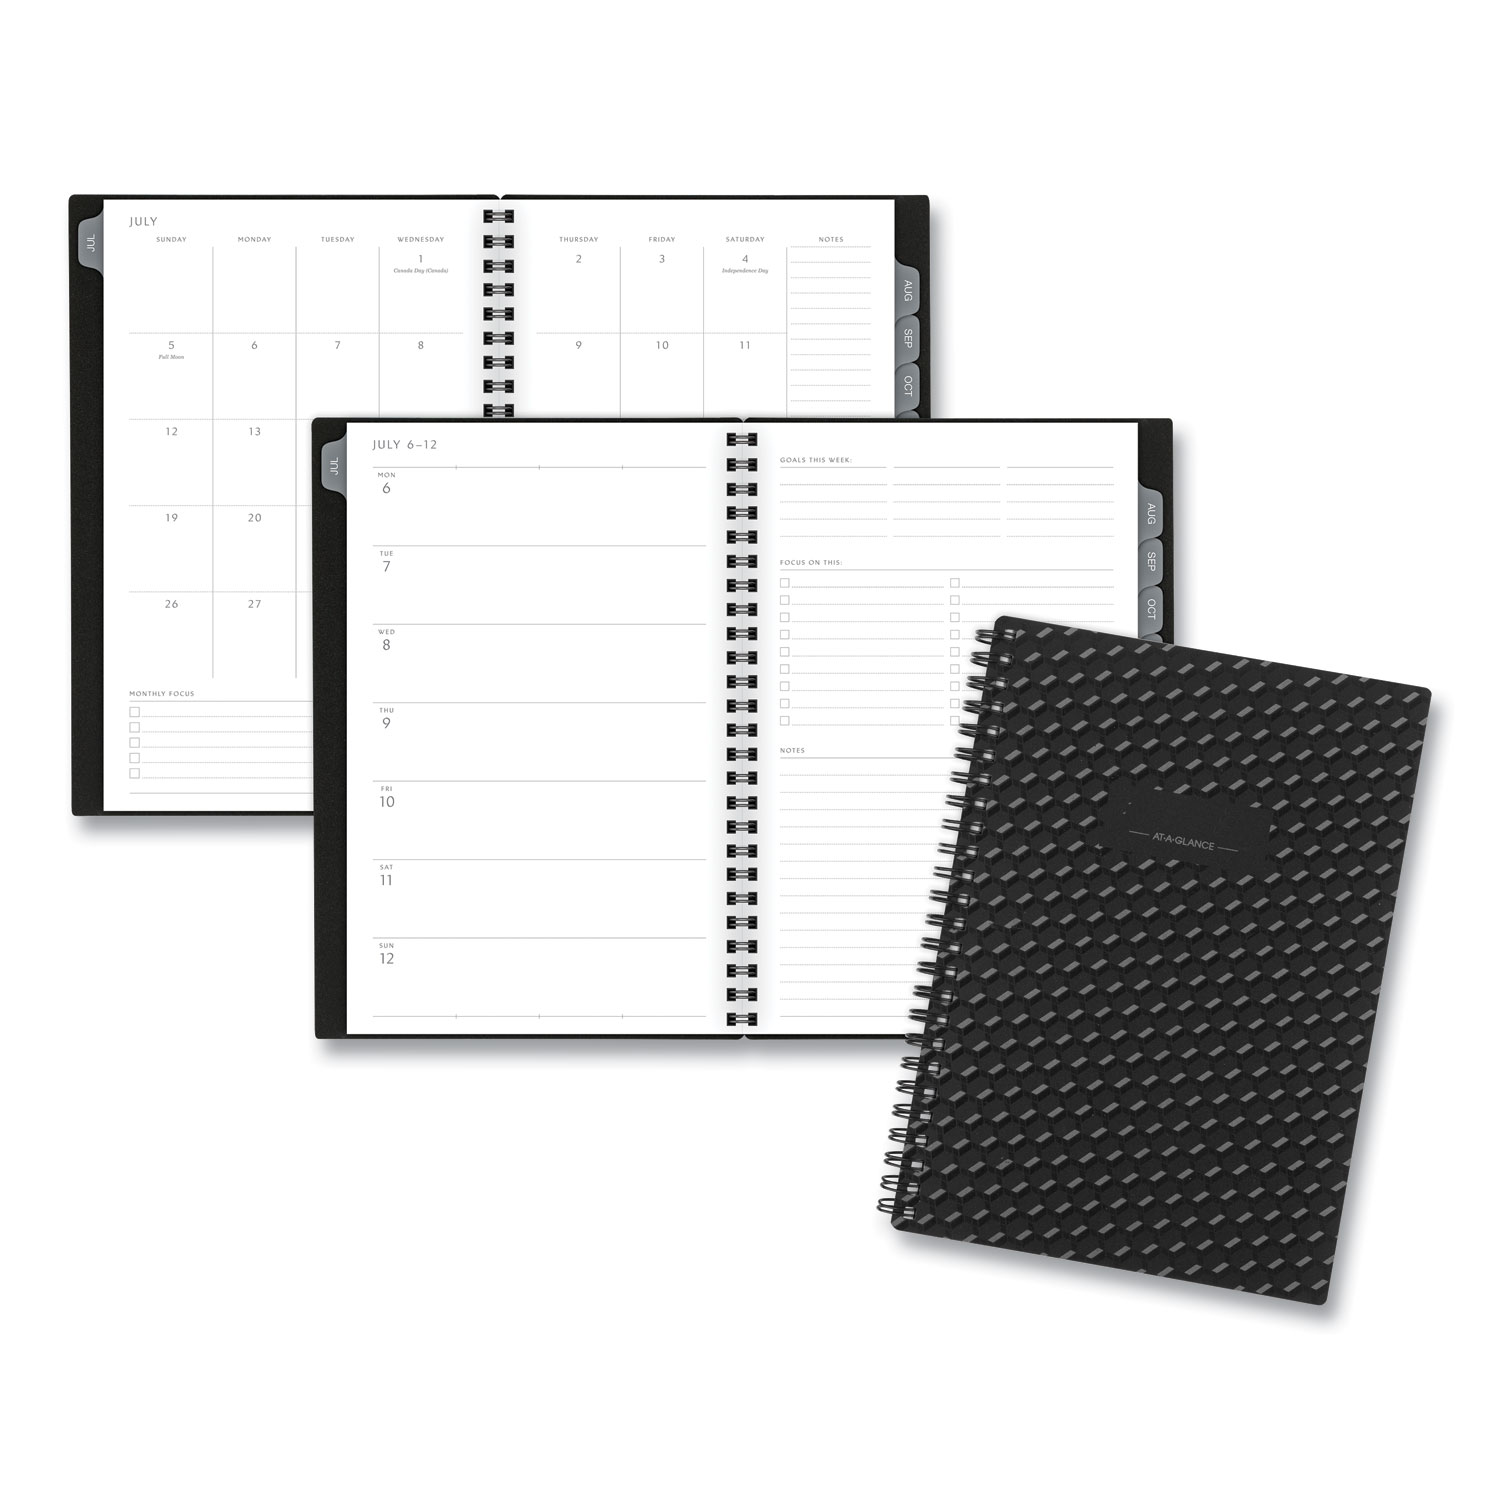  AT-A-GLANCE 75101P05 Elevation Academic Weekly/Monthly Planner, 8.5 x 5.5, Black, 2020-2021 (AAG75101P05) 